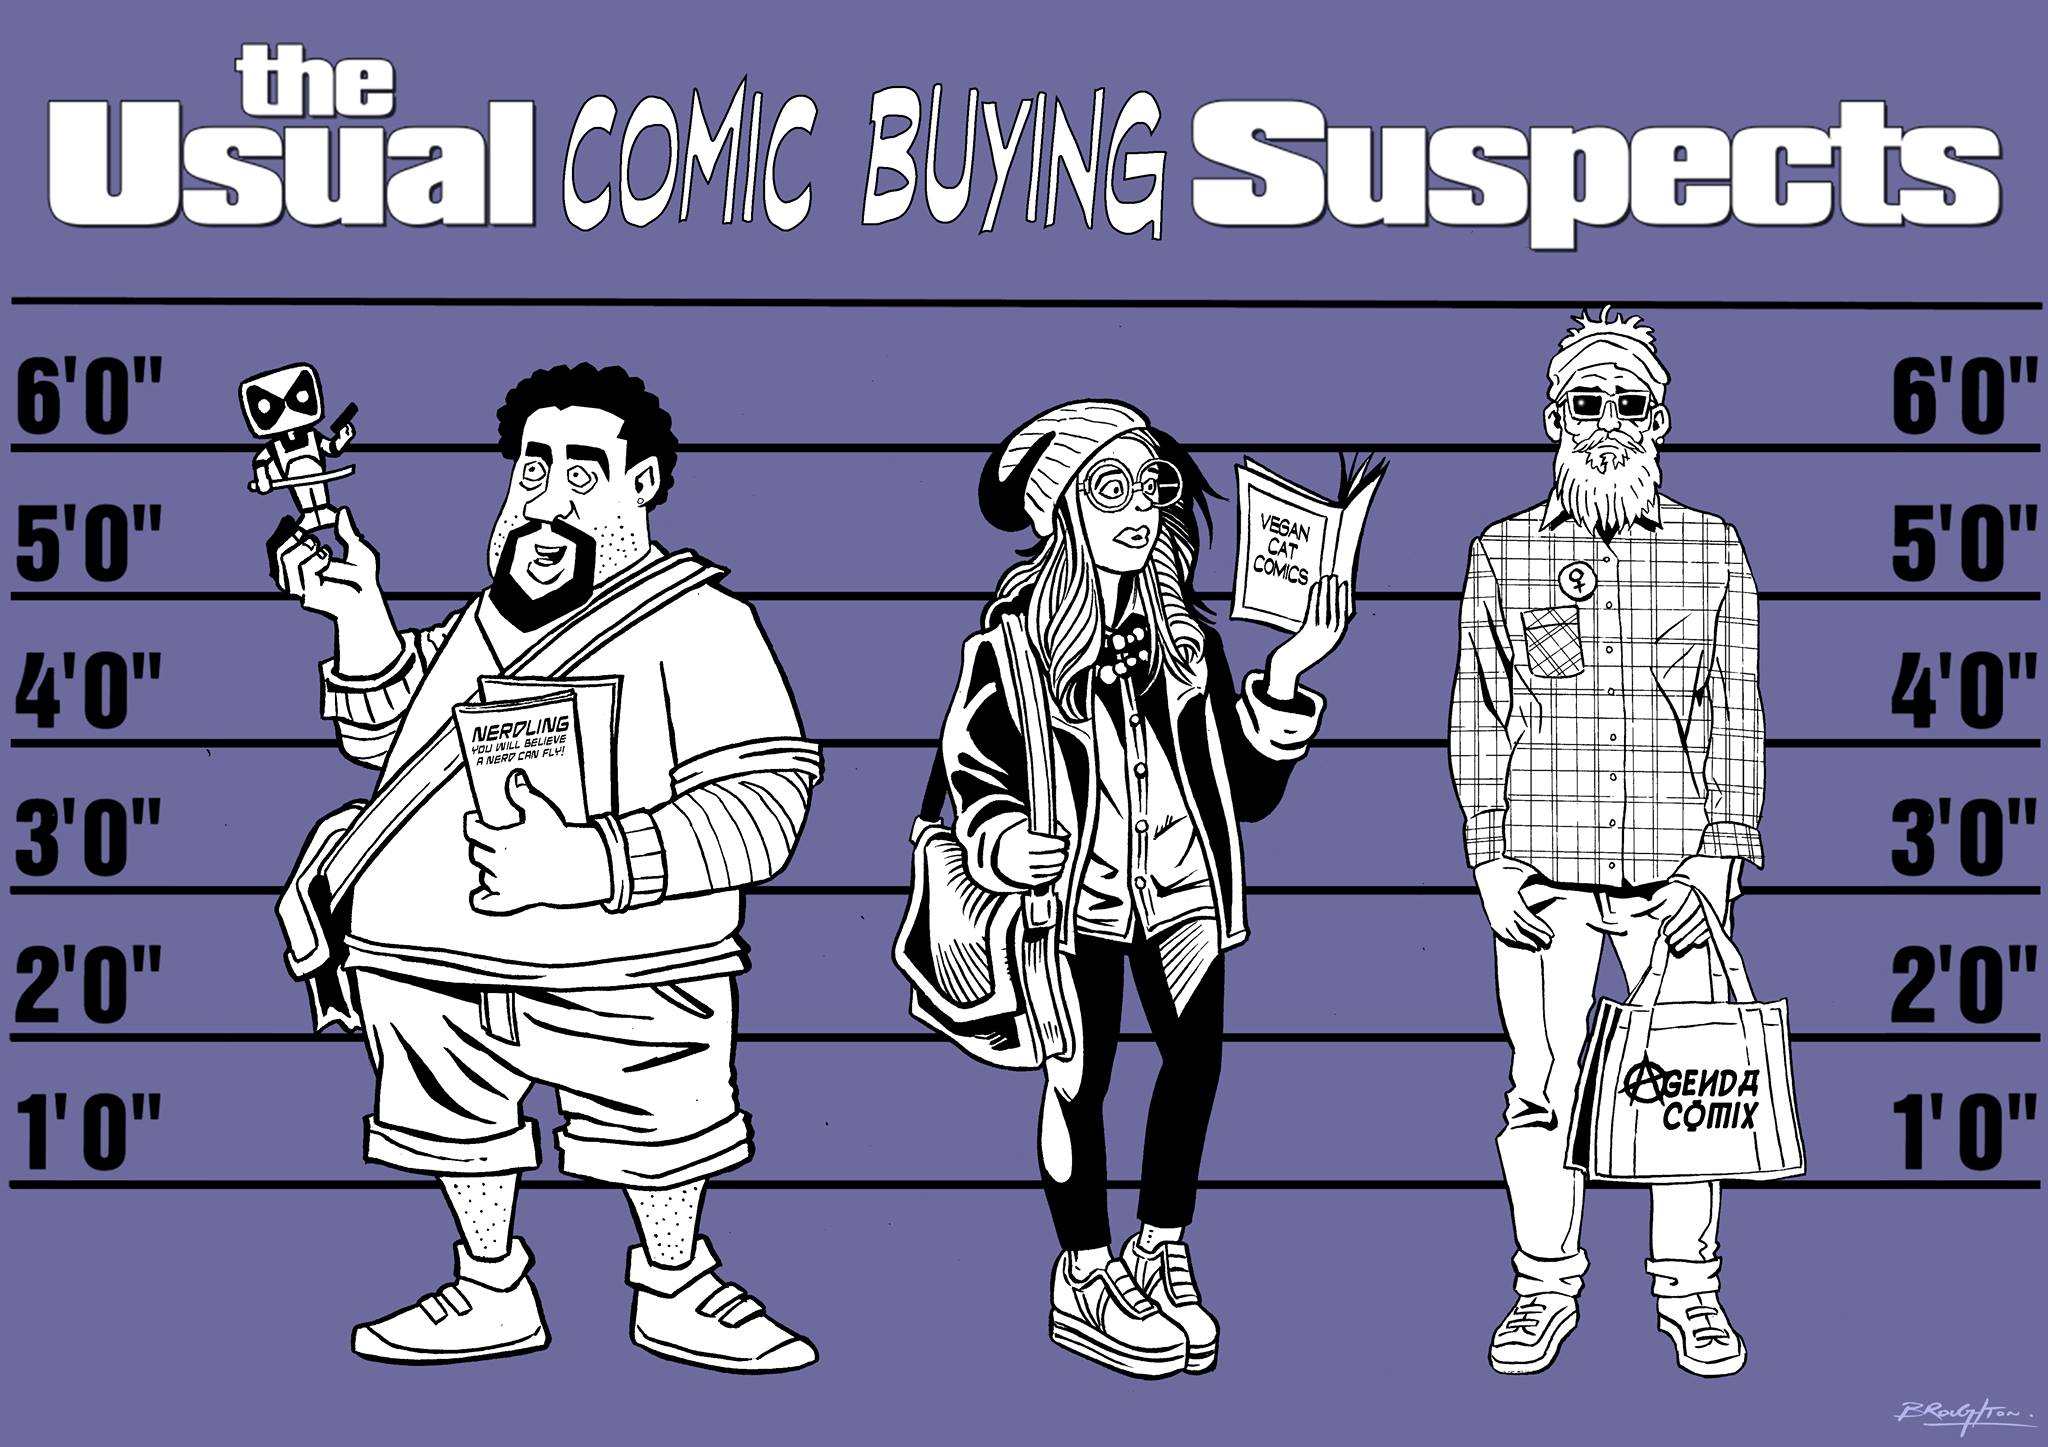 The Usual Comic Buying Suspects by David Broughton